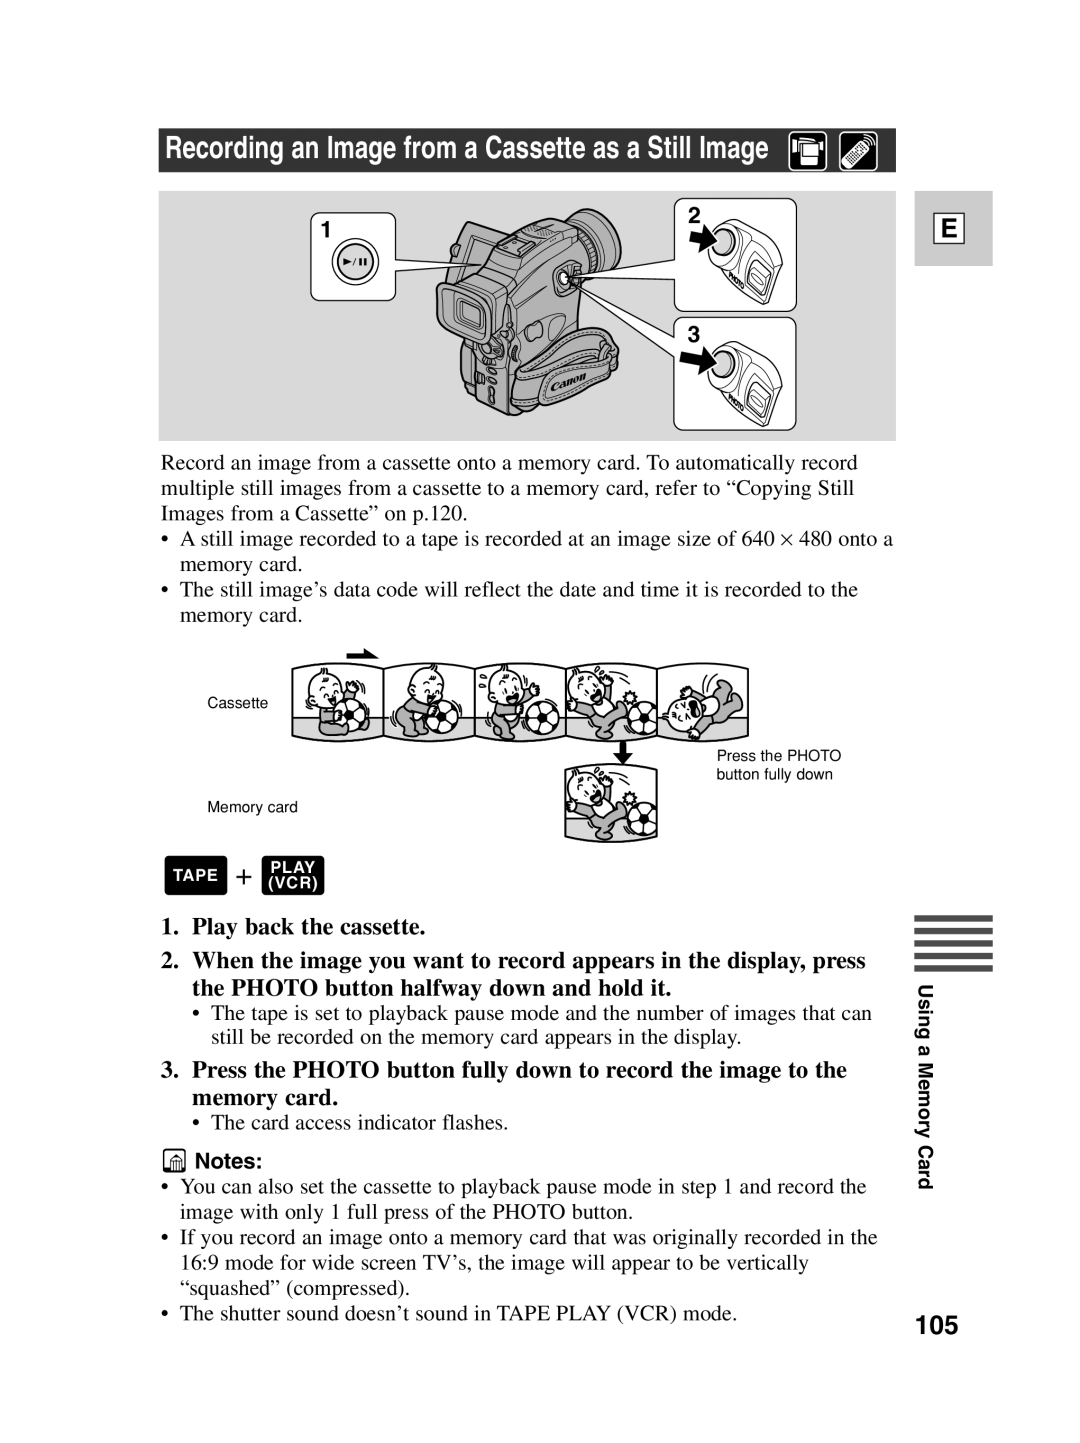 Canon Optura 100 instruction manual Recording an Image from a Cassette as a Still Image, 105 